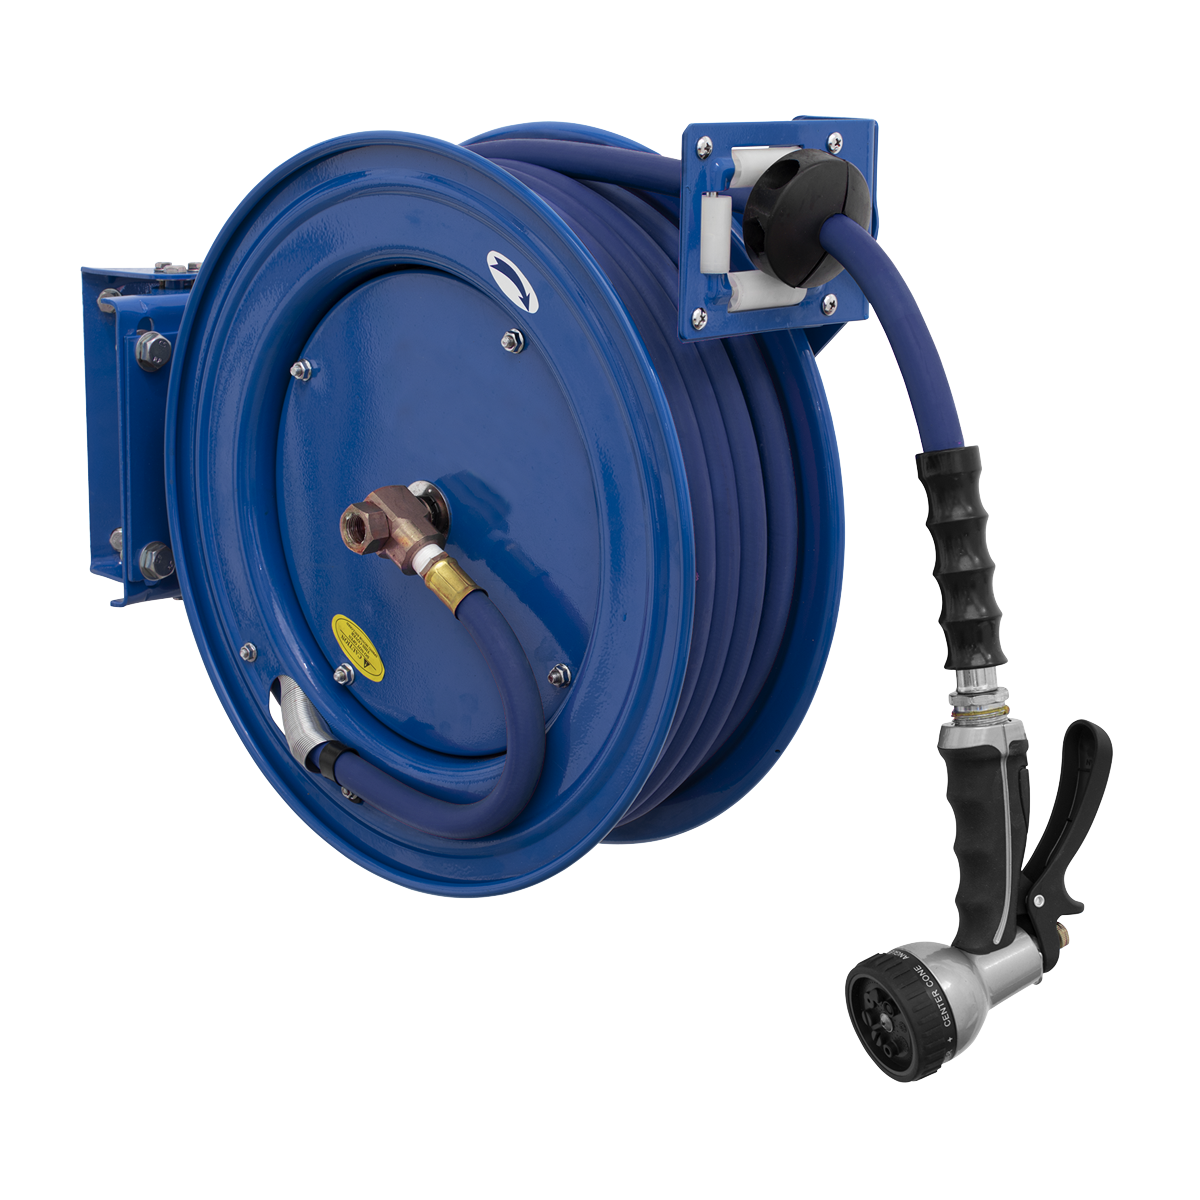 Heavy-Duty Hose Reel Cart with 5m Heavy-Duty Ø19mm Hot & Cold Rubber Water  Hose